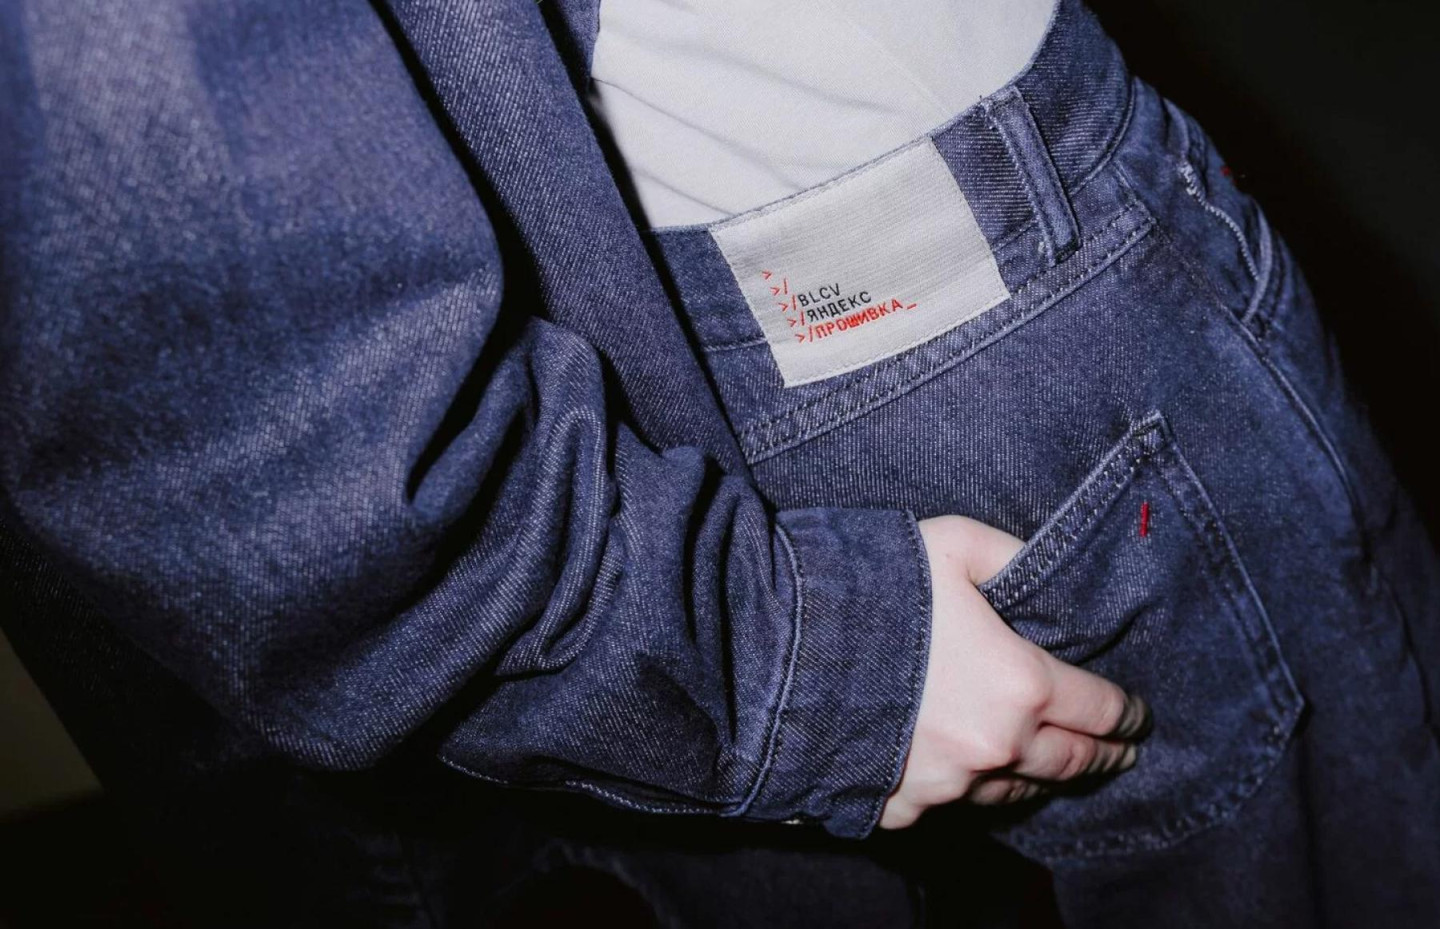 BLCV and Yandex released a capsule collection of denim “Firmware”